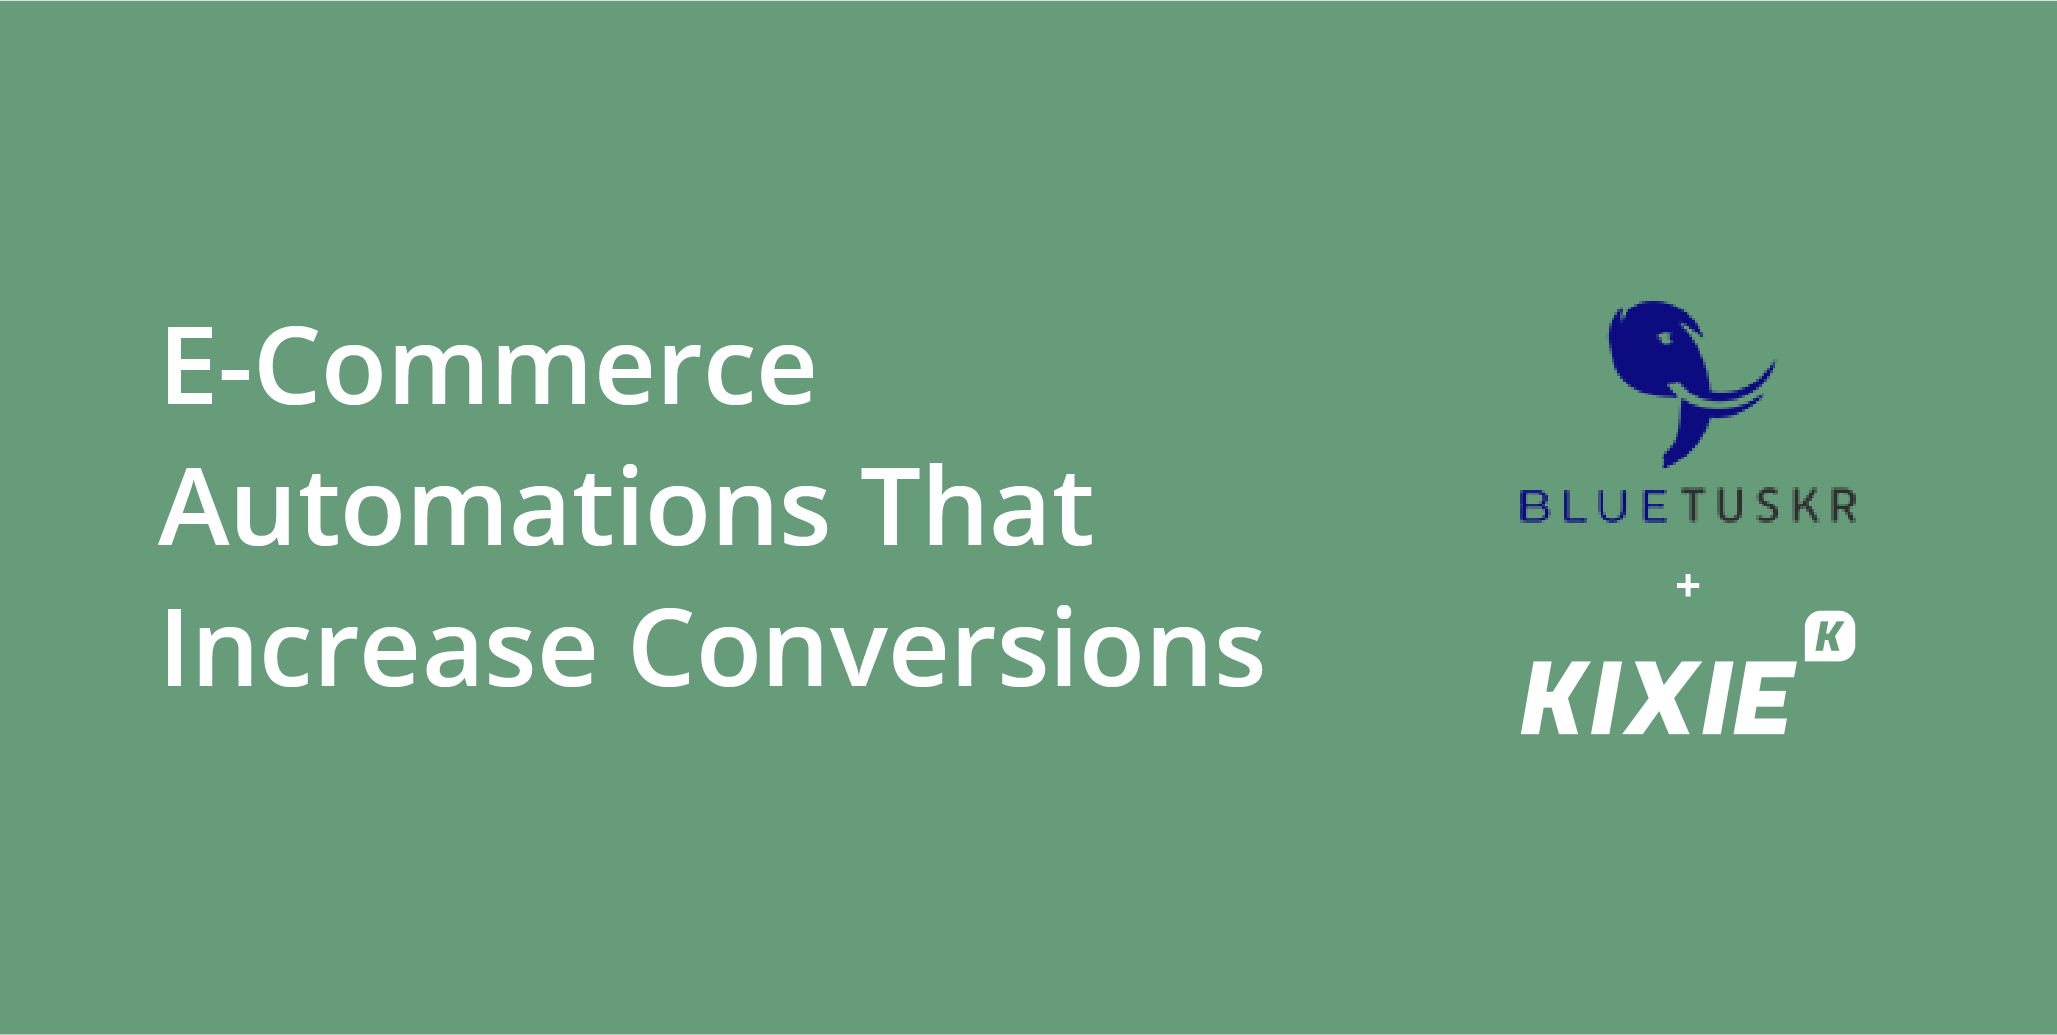 E-Commerce Automations That Increase Conversions | BlueTuskr